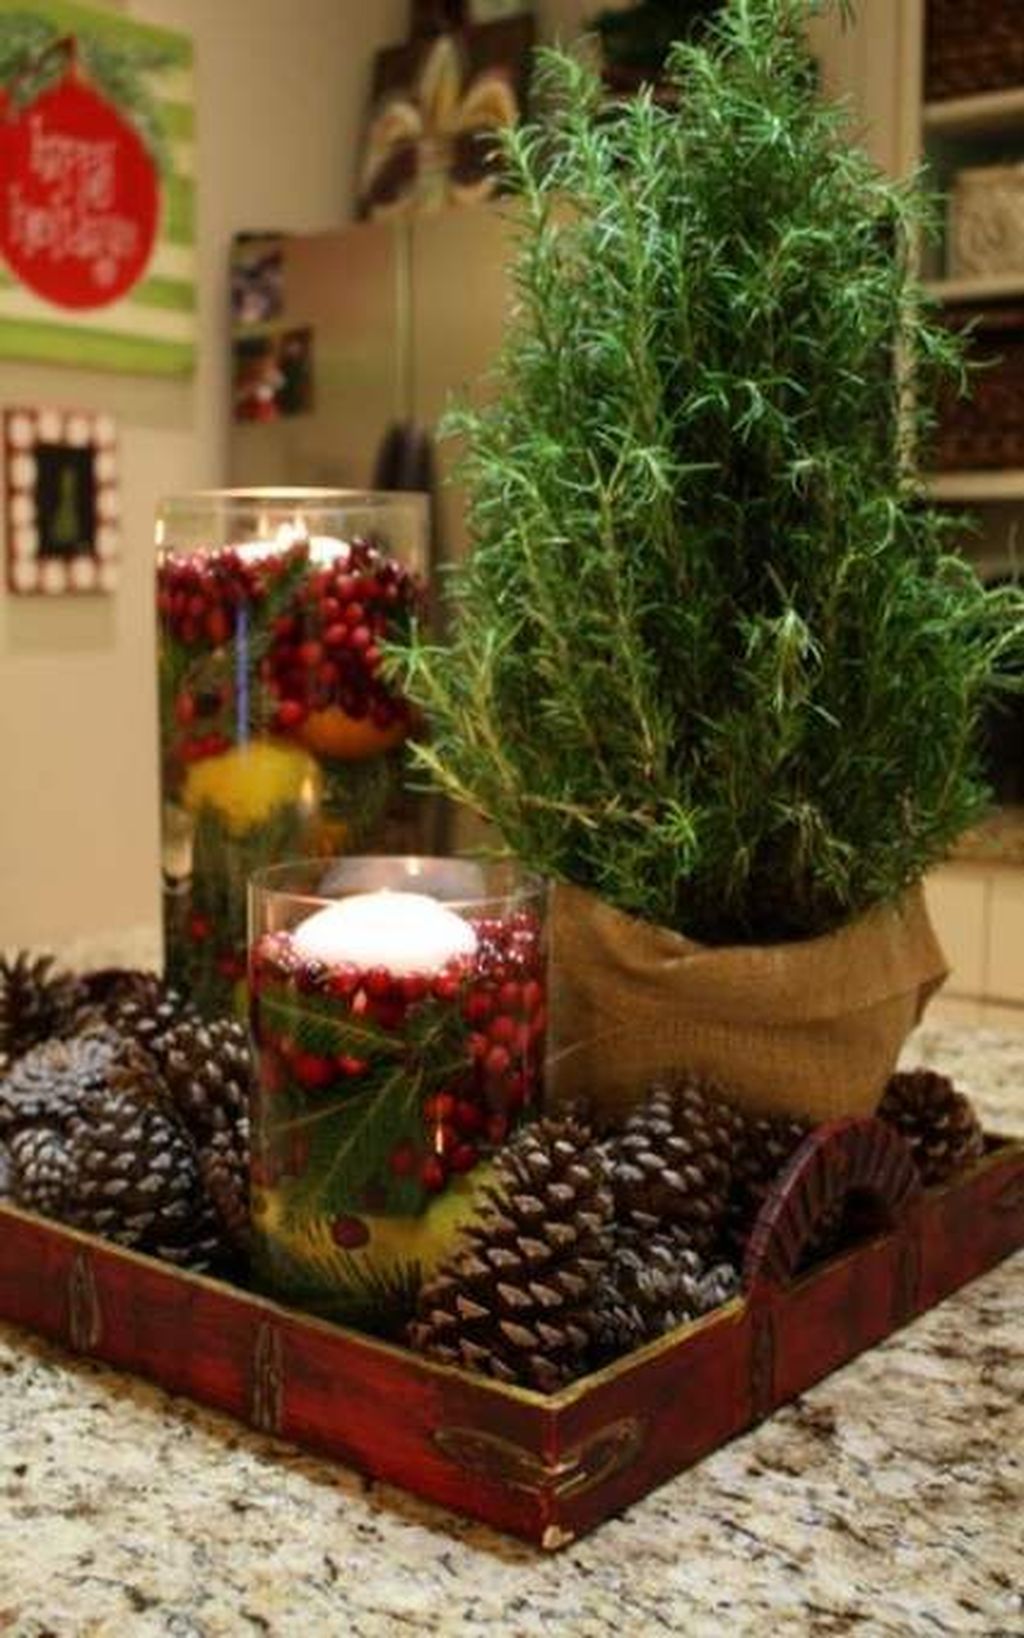 42 Amazing Christmas Decor For Kitchen Table - PIMPHOMEE